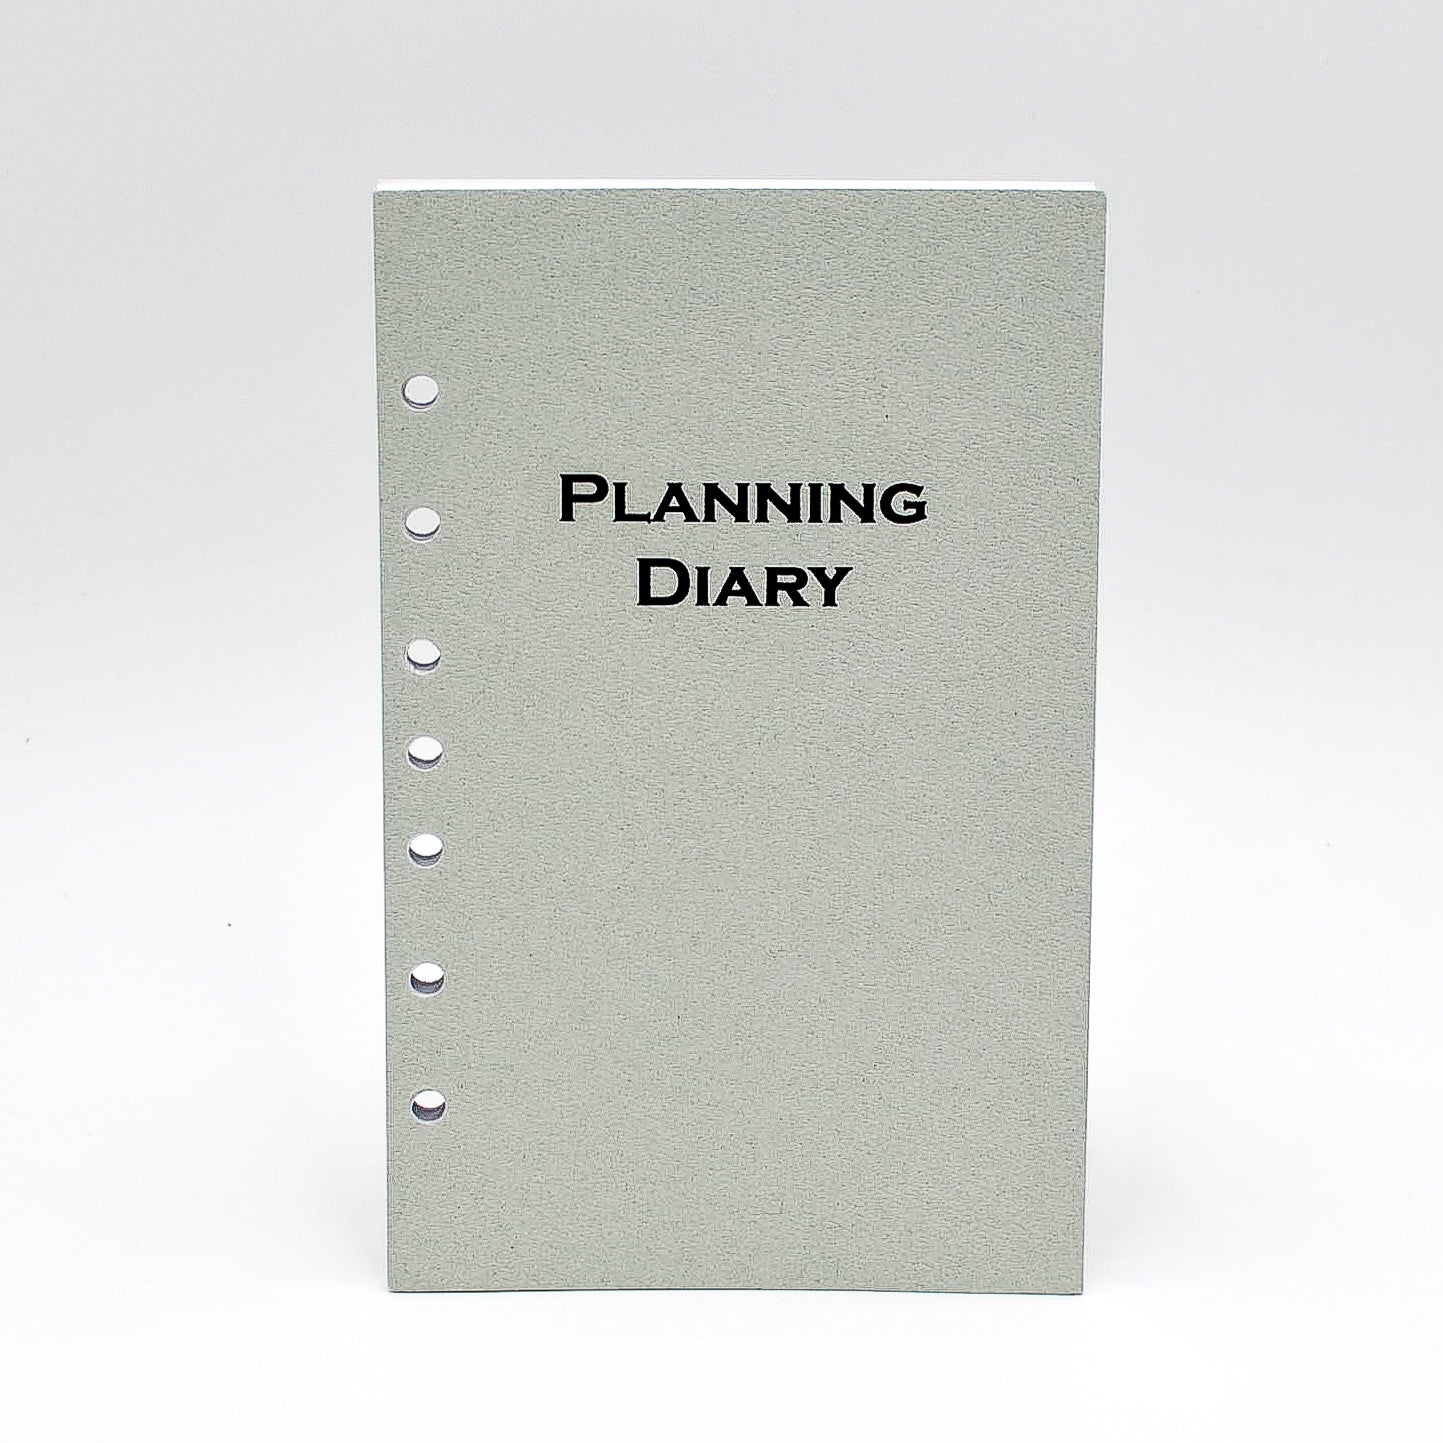  Half Size Flower Lined Wide Ruled Planner Insert Refill, 5.5 x  8.5 inches, Pre-Punched for 7-Rings to Fit Day Timer, Franklin Covey and  Other Binders, 30 Sheets Per Pack : Handmade Products